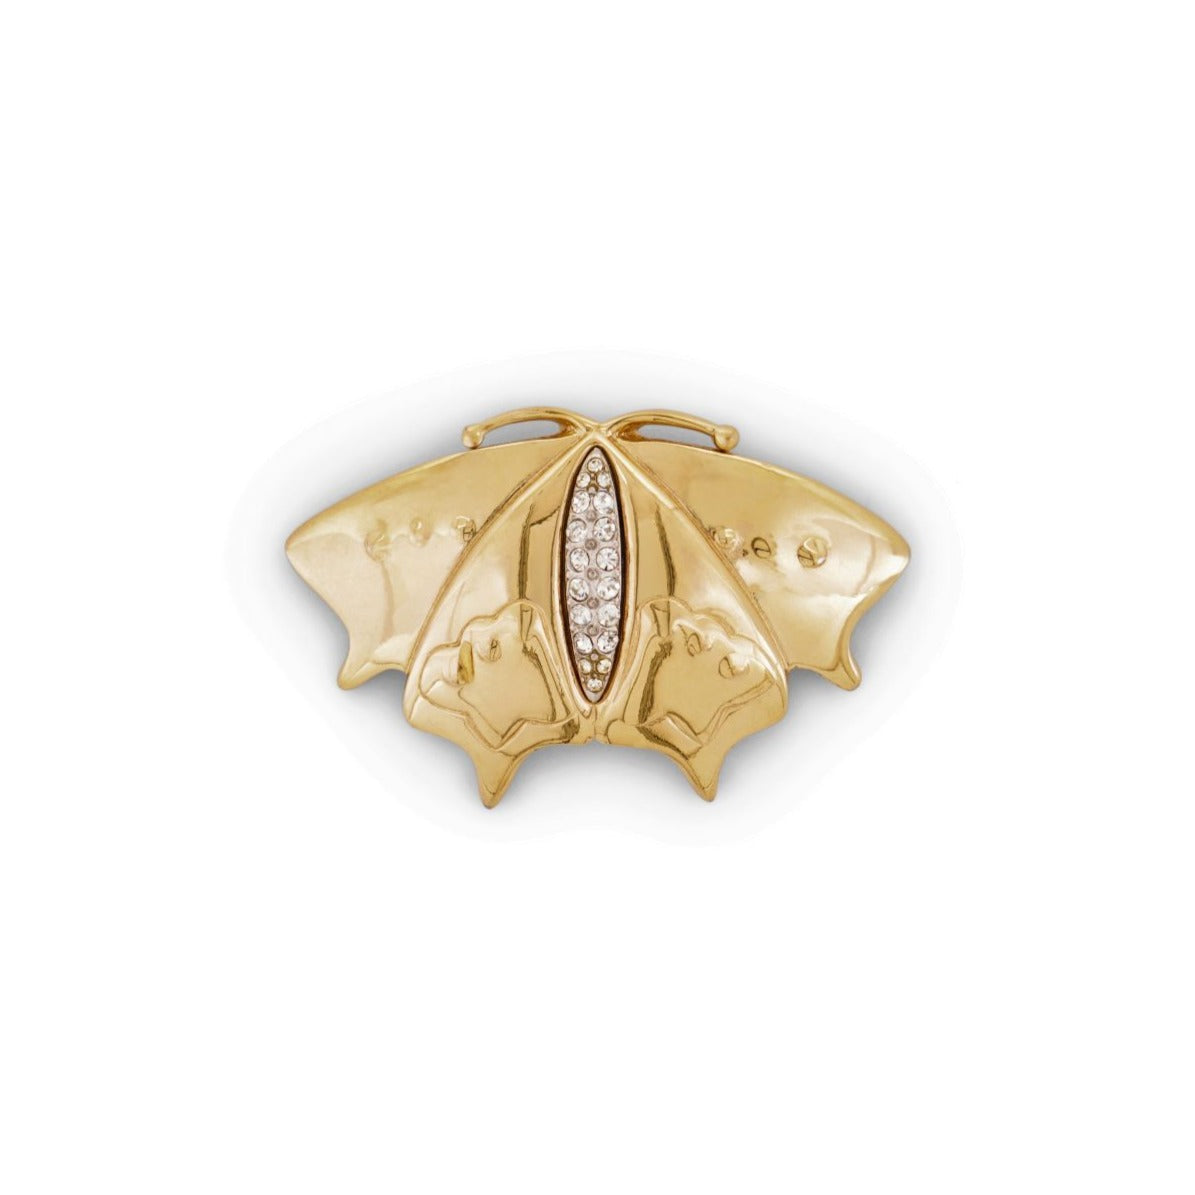 Vintage Givenchy butterfly pin brooch in gold-tone metal and rhinestones